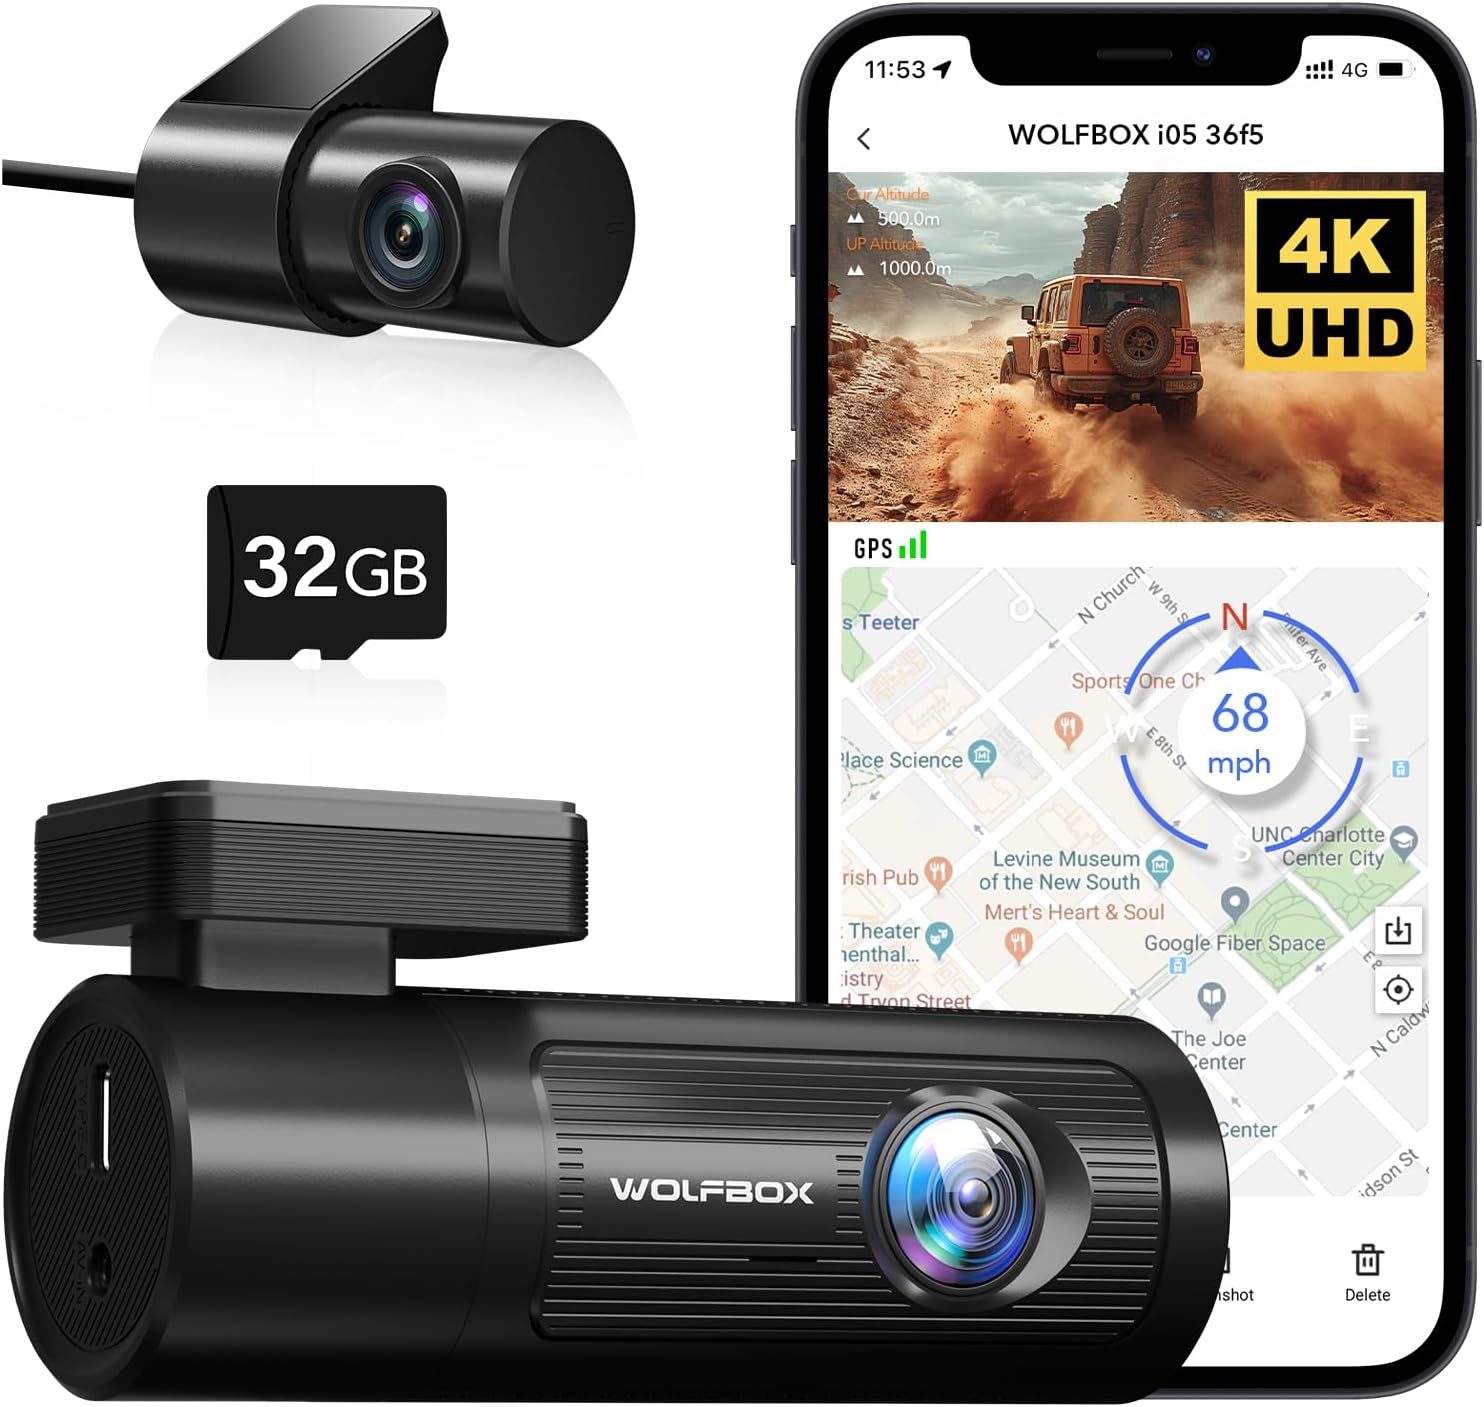 WOLFBOX 4K Dash Cam Front and Rear - Lightning Deal 53% Off $79.99